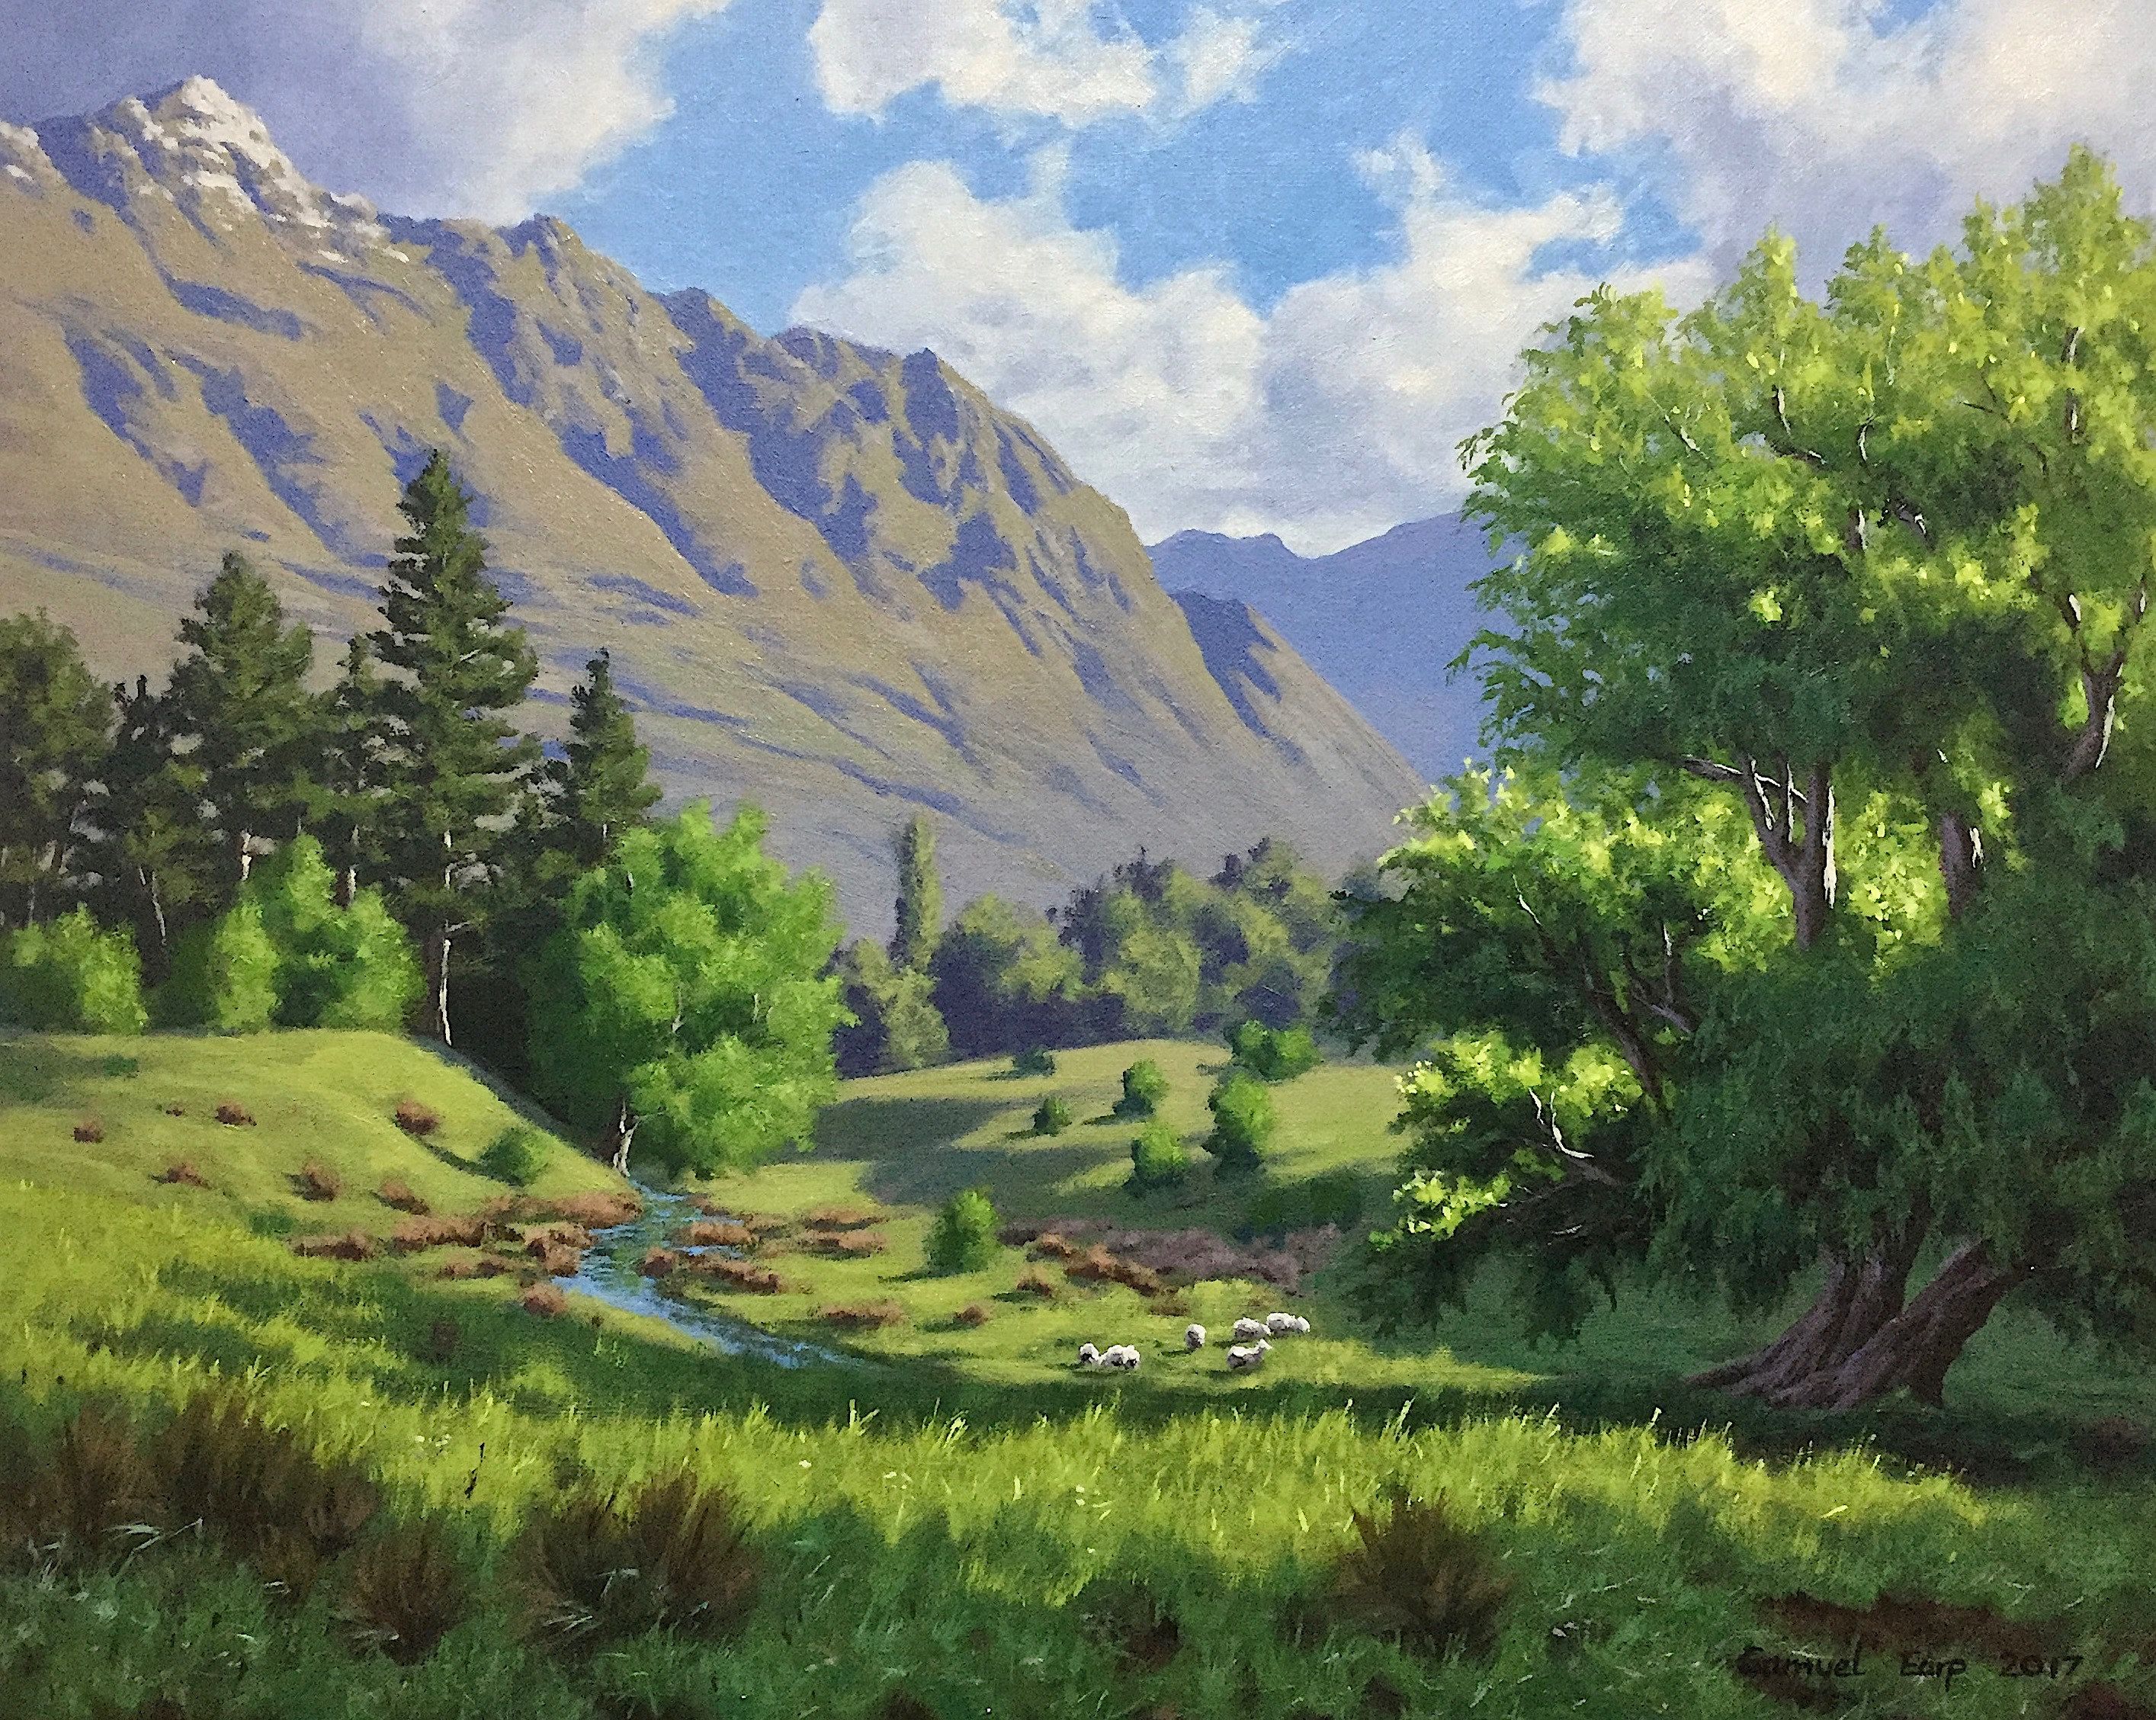 Mountain Valley New Zealand Painting Process Photos And Final Art Work Steemit